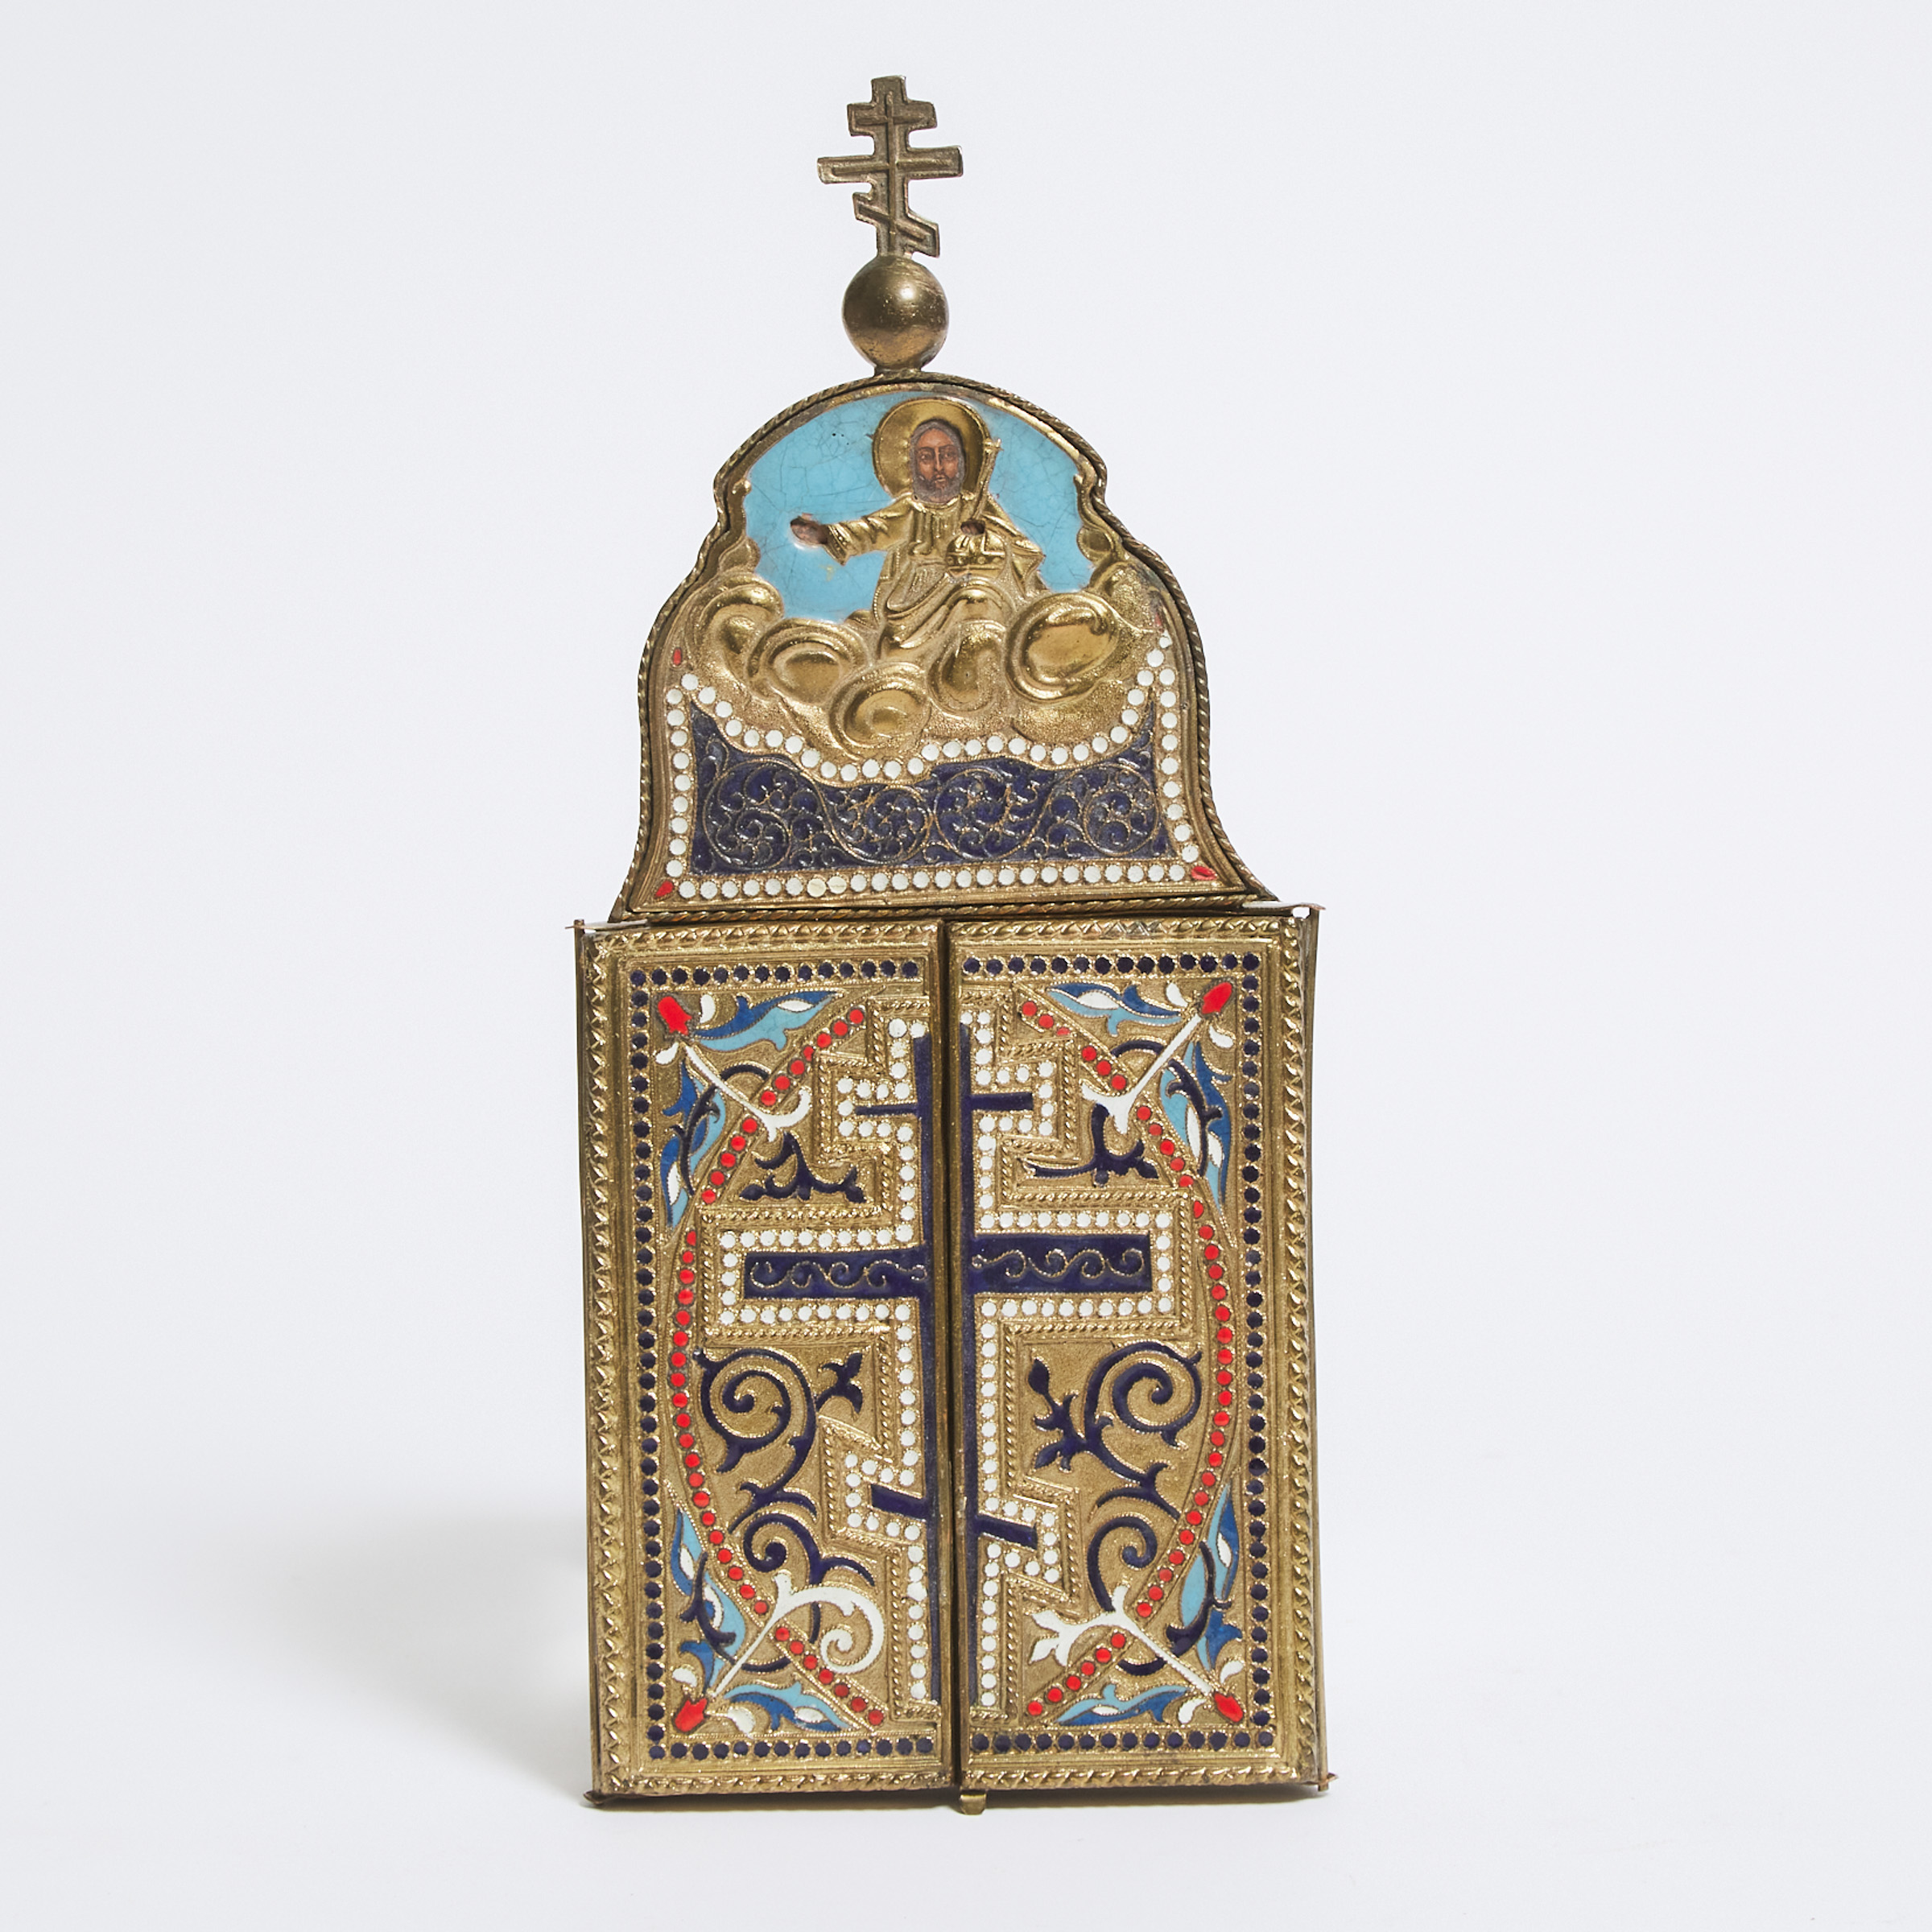 Russian Orthodox Enamelled Repoussée Worked Gilt Metal St. Nicholas Triptych Travelling Icon, 19th/early 20th century